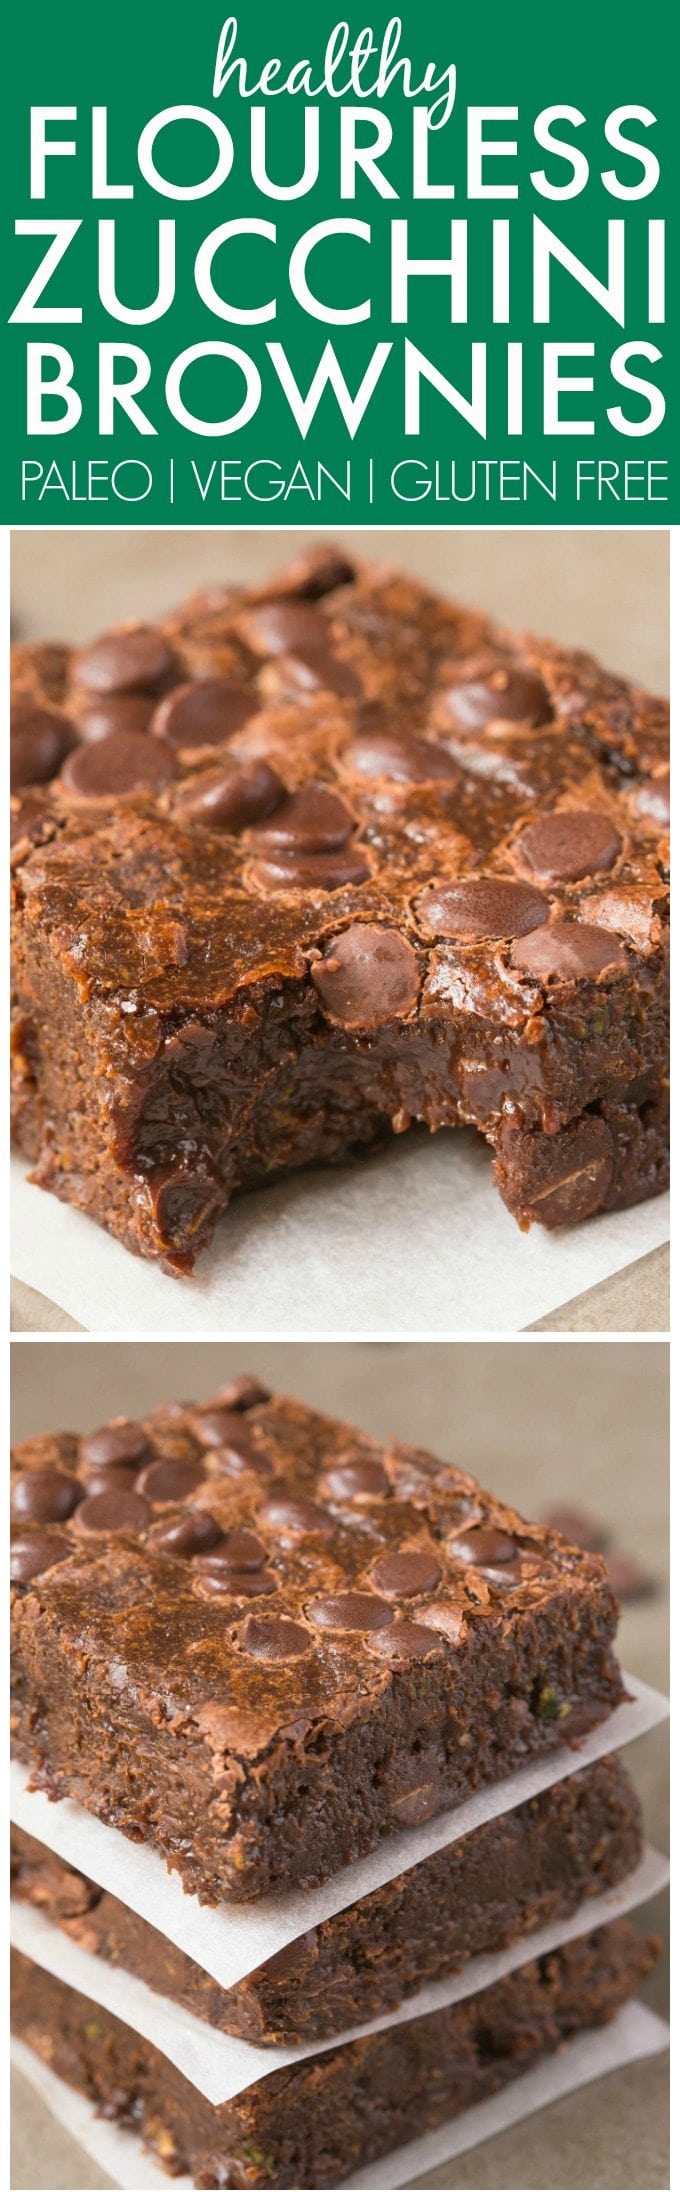 Healthy FLOURLESS Zucchini Fudge Brownies made with NO butter and NO flour and ridiculously easy- Hands down, BEST brownies ever! {vegan, gluten free, paleo recipe}- thebigmansworld.com